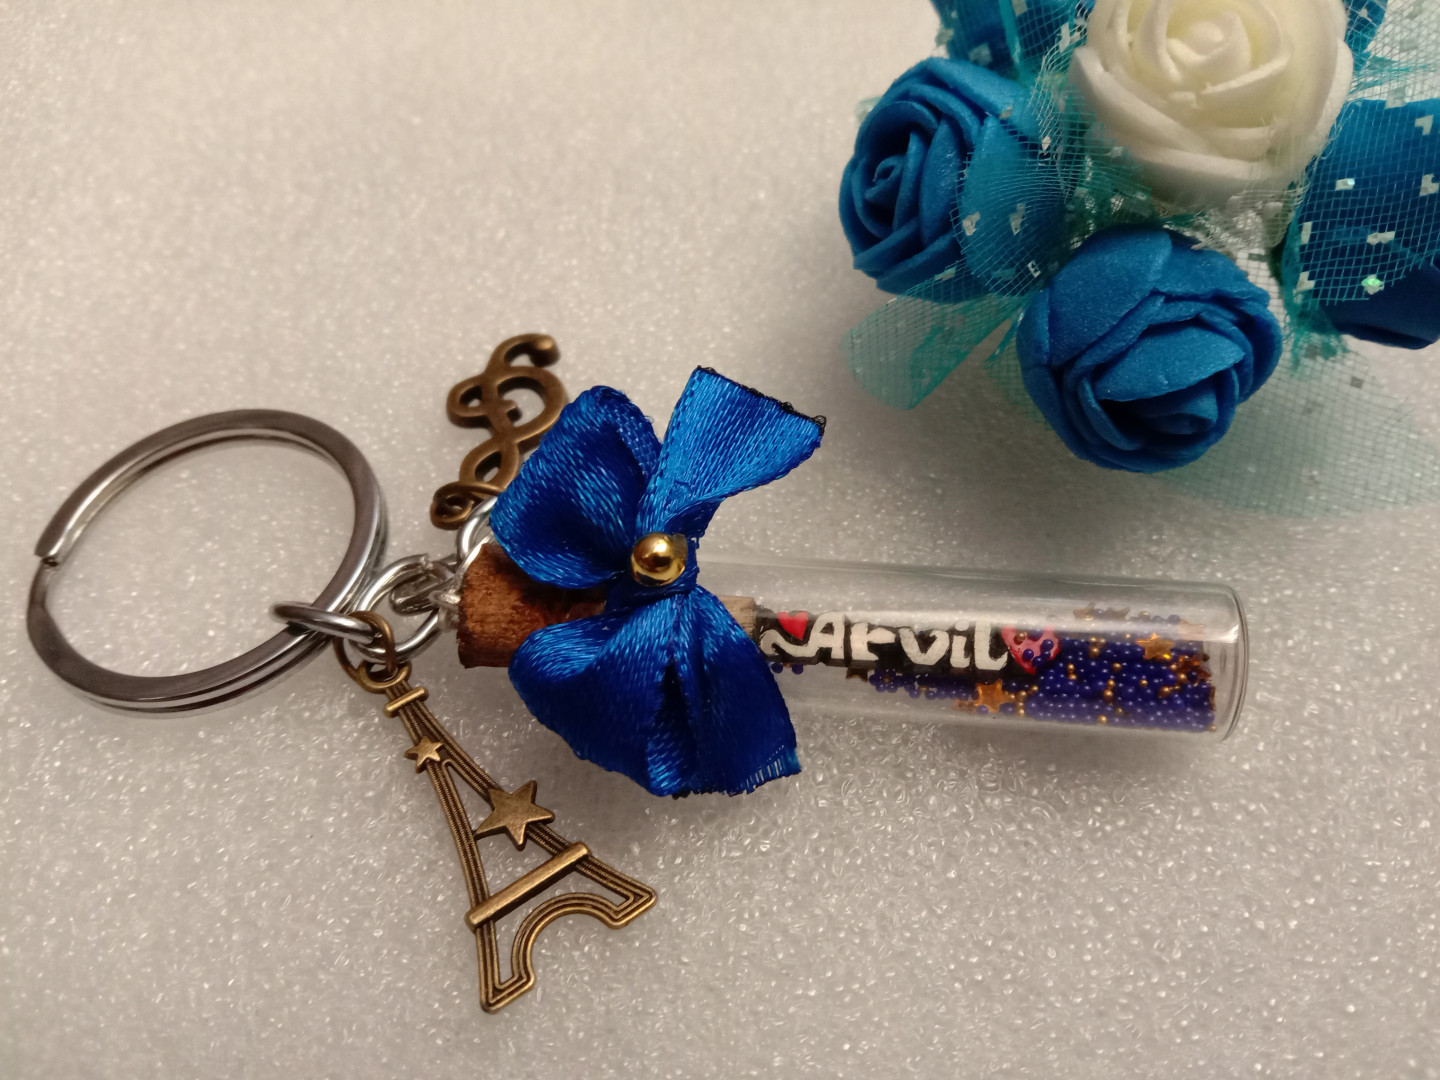 Pencilcarving keychain